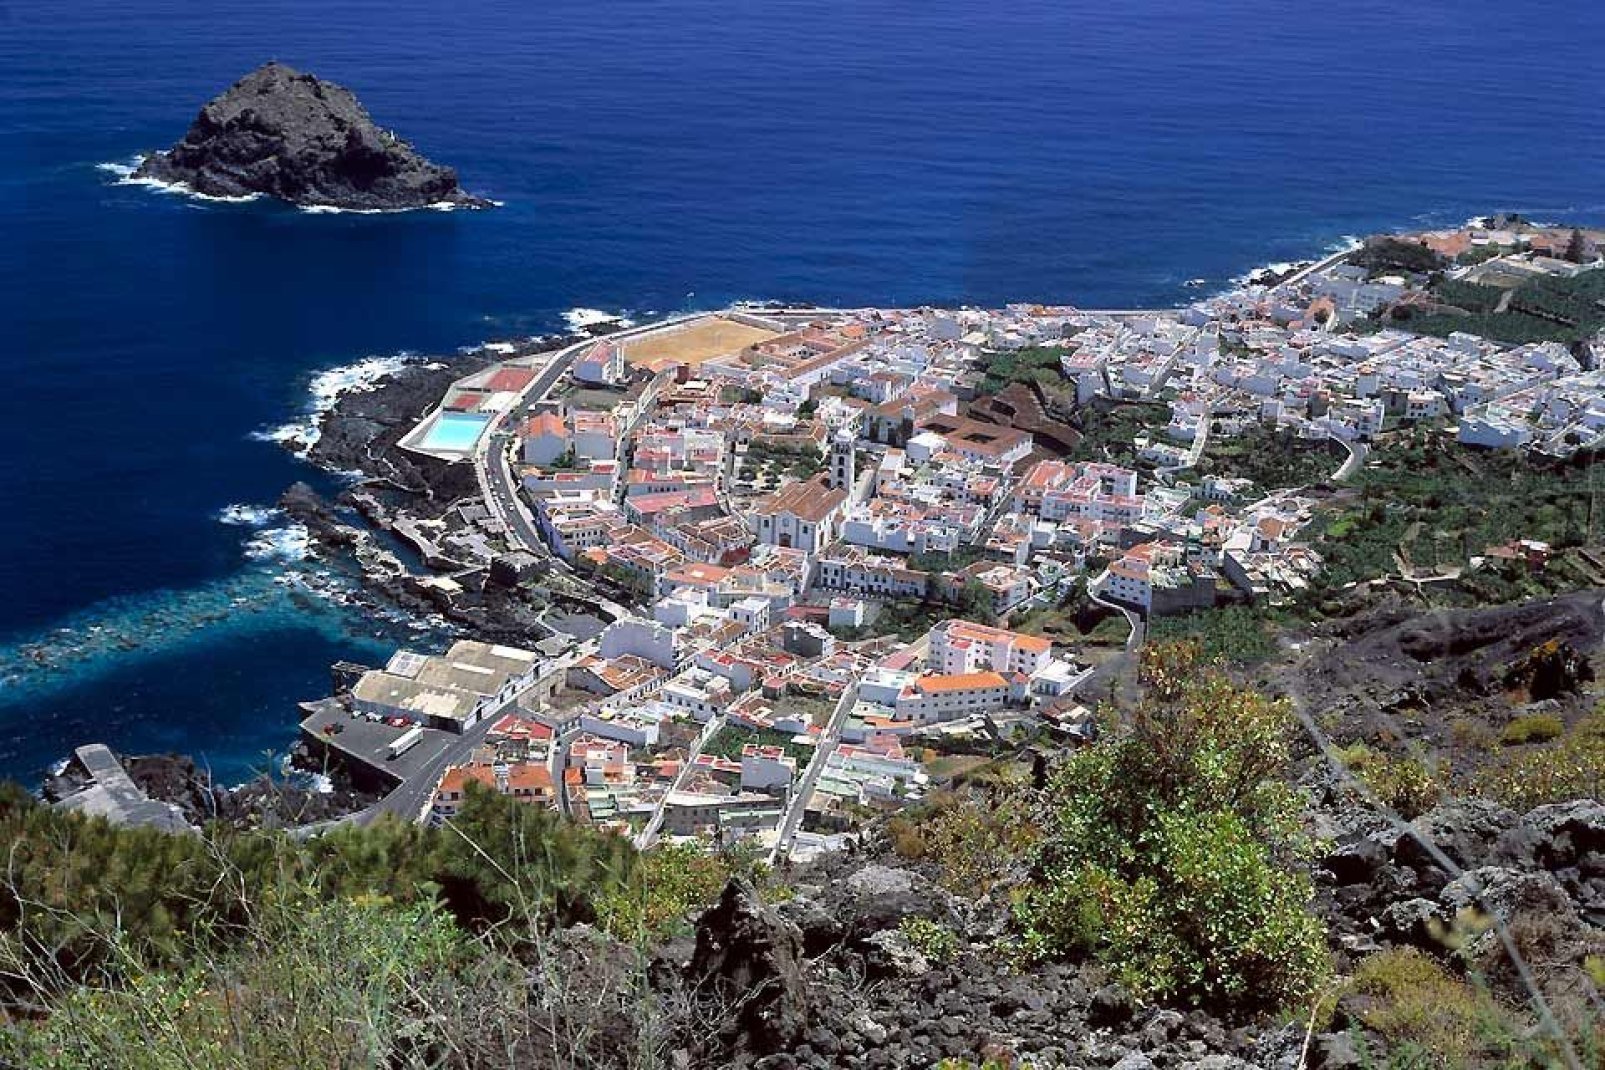 Garachico was the most important port on the island until 1706, when Teide violently erupted and destroyed a good part of the town.